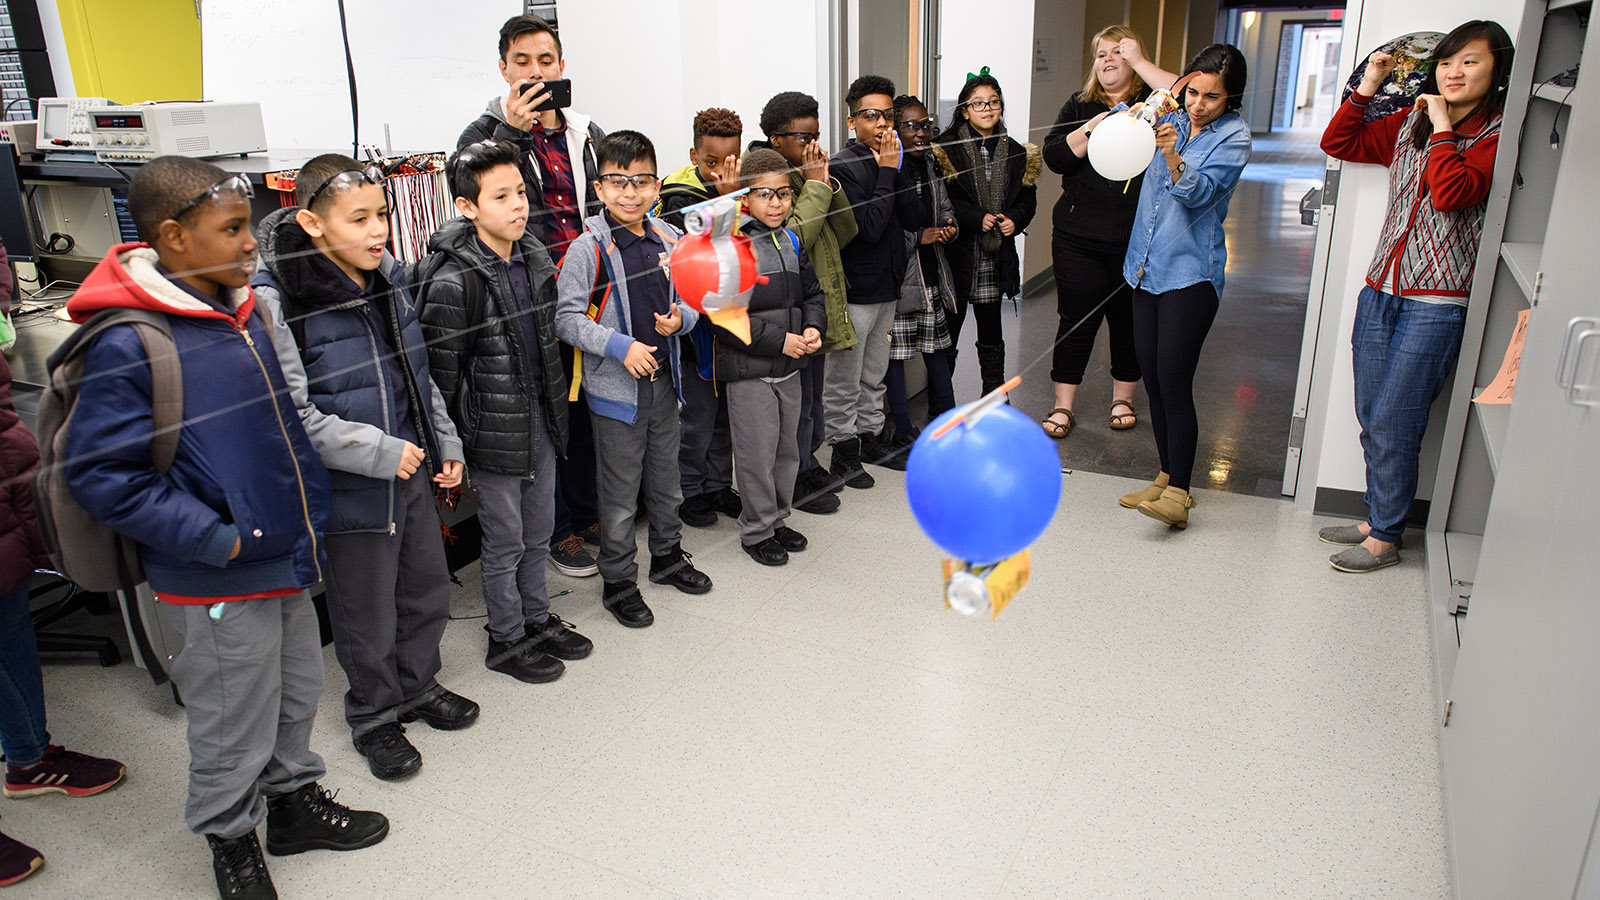 Elementary school students race their balloon-powered rockets along strings